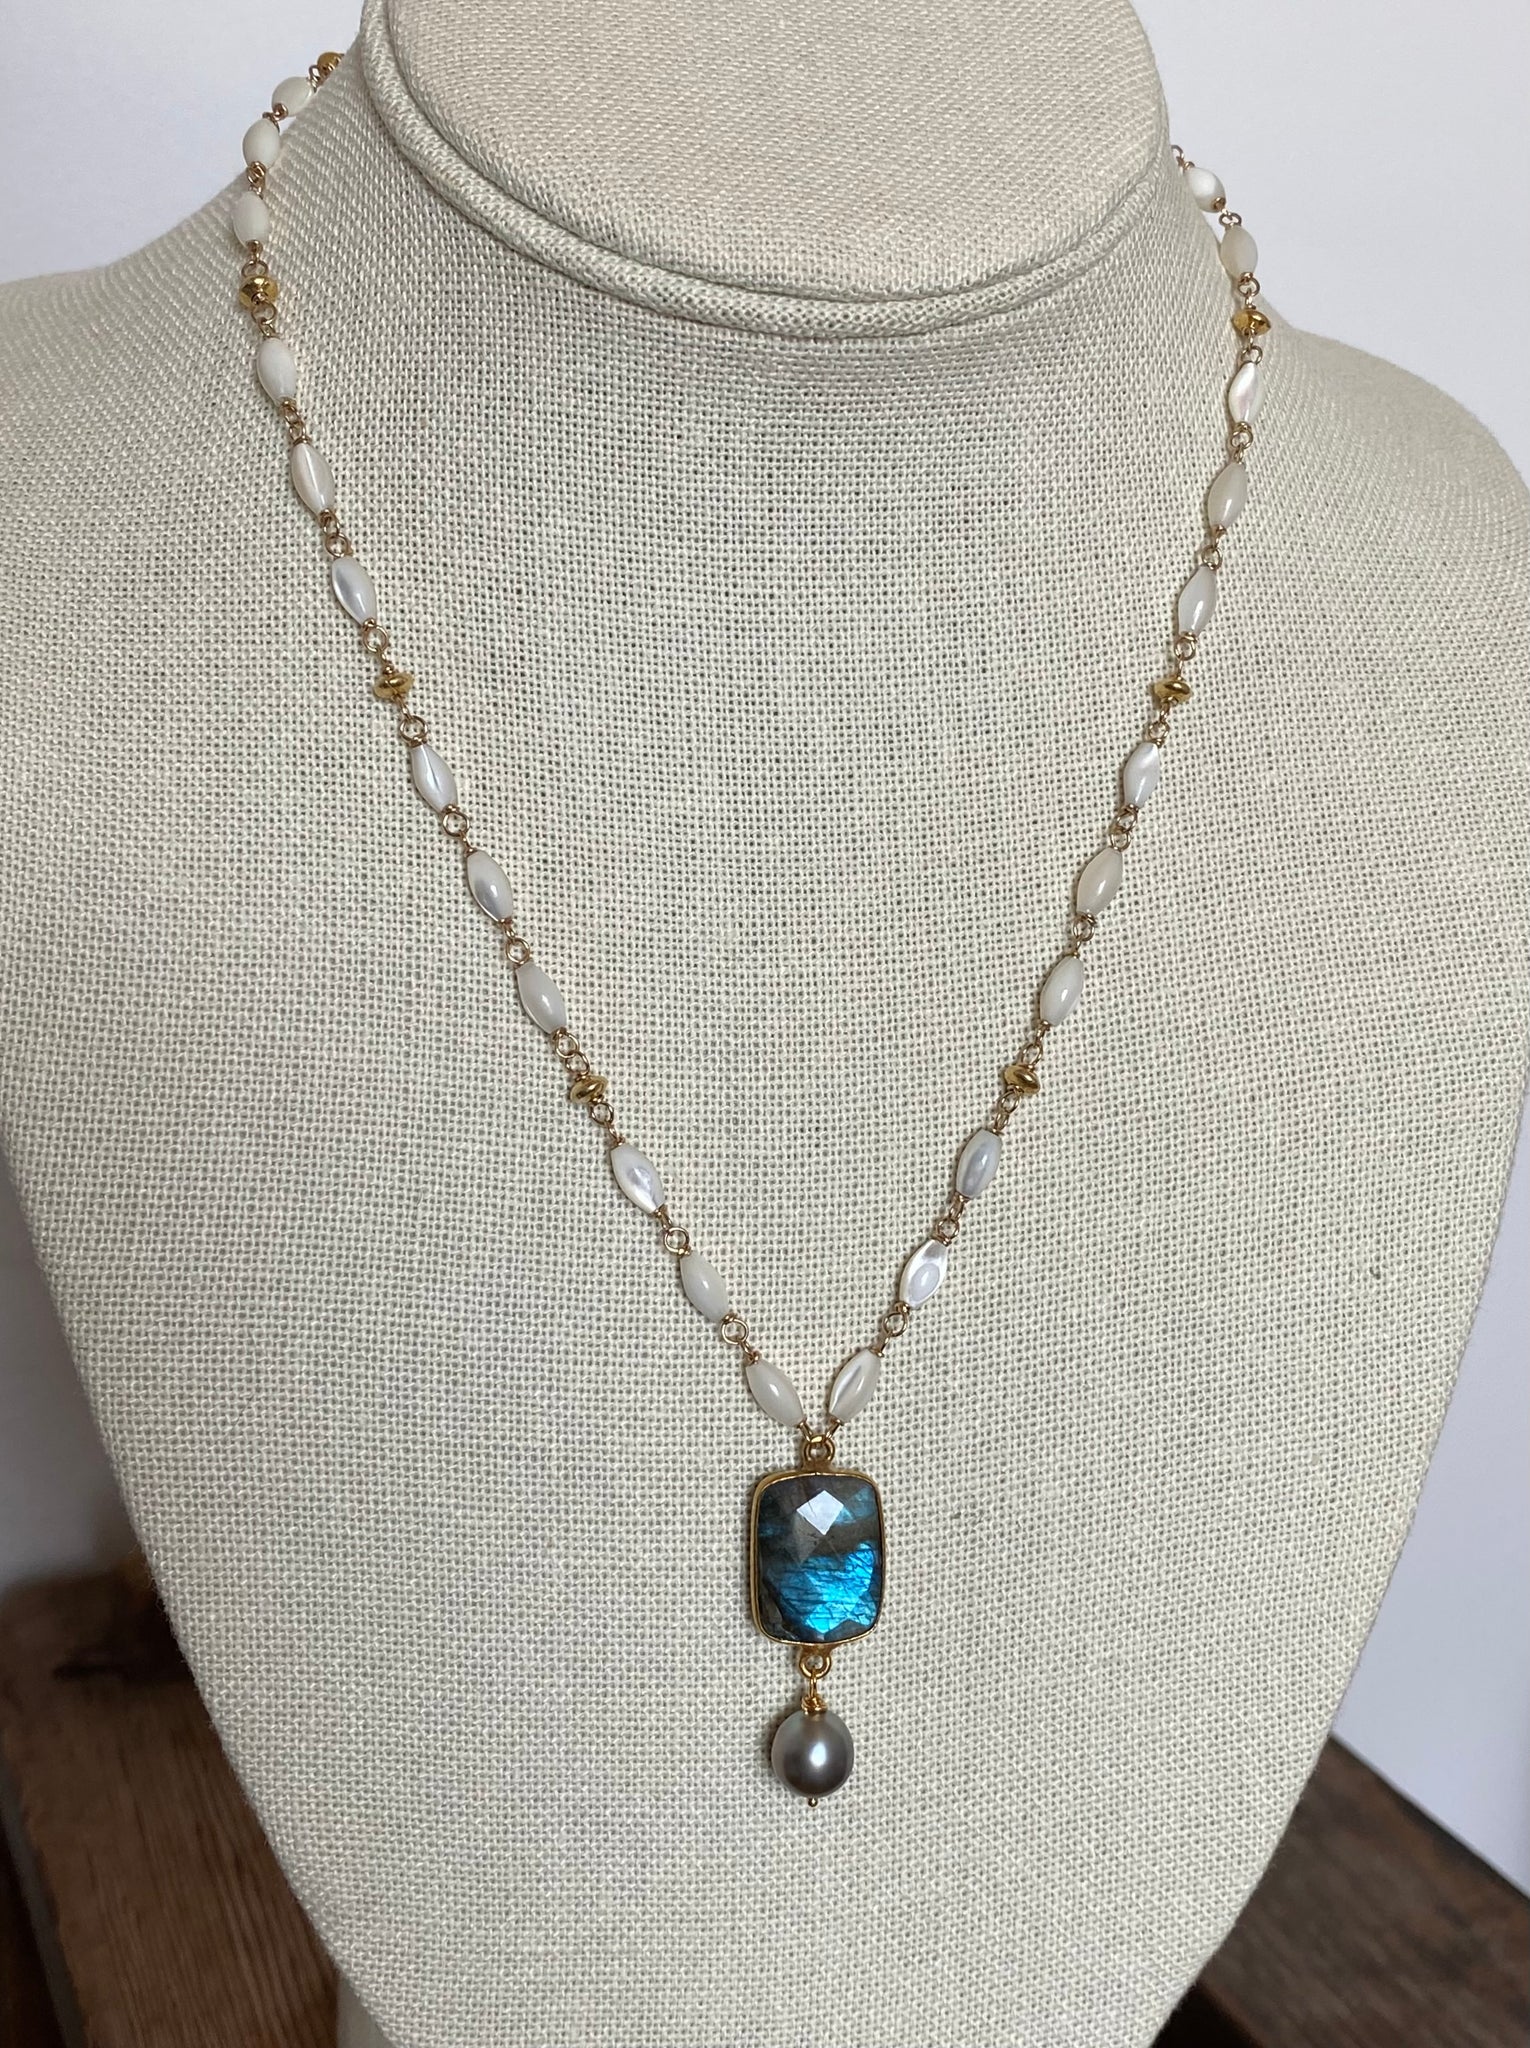 Labradorite and Mother of Pearl Necklace for Susanna